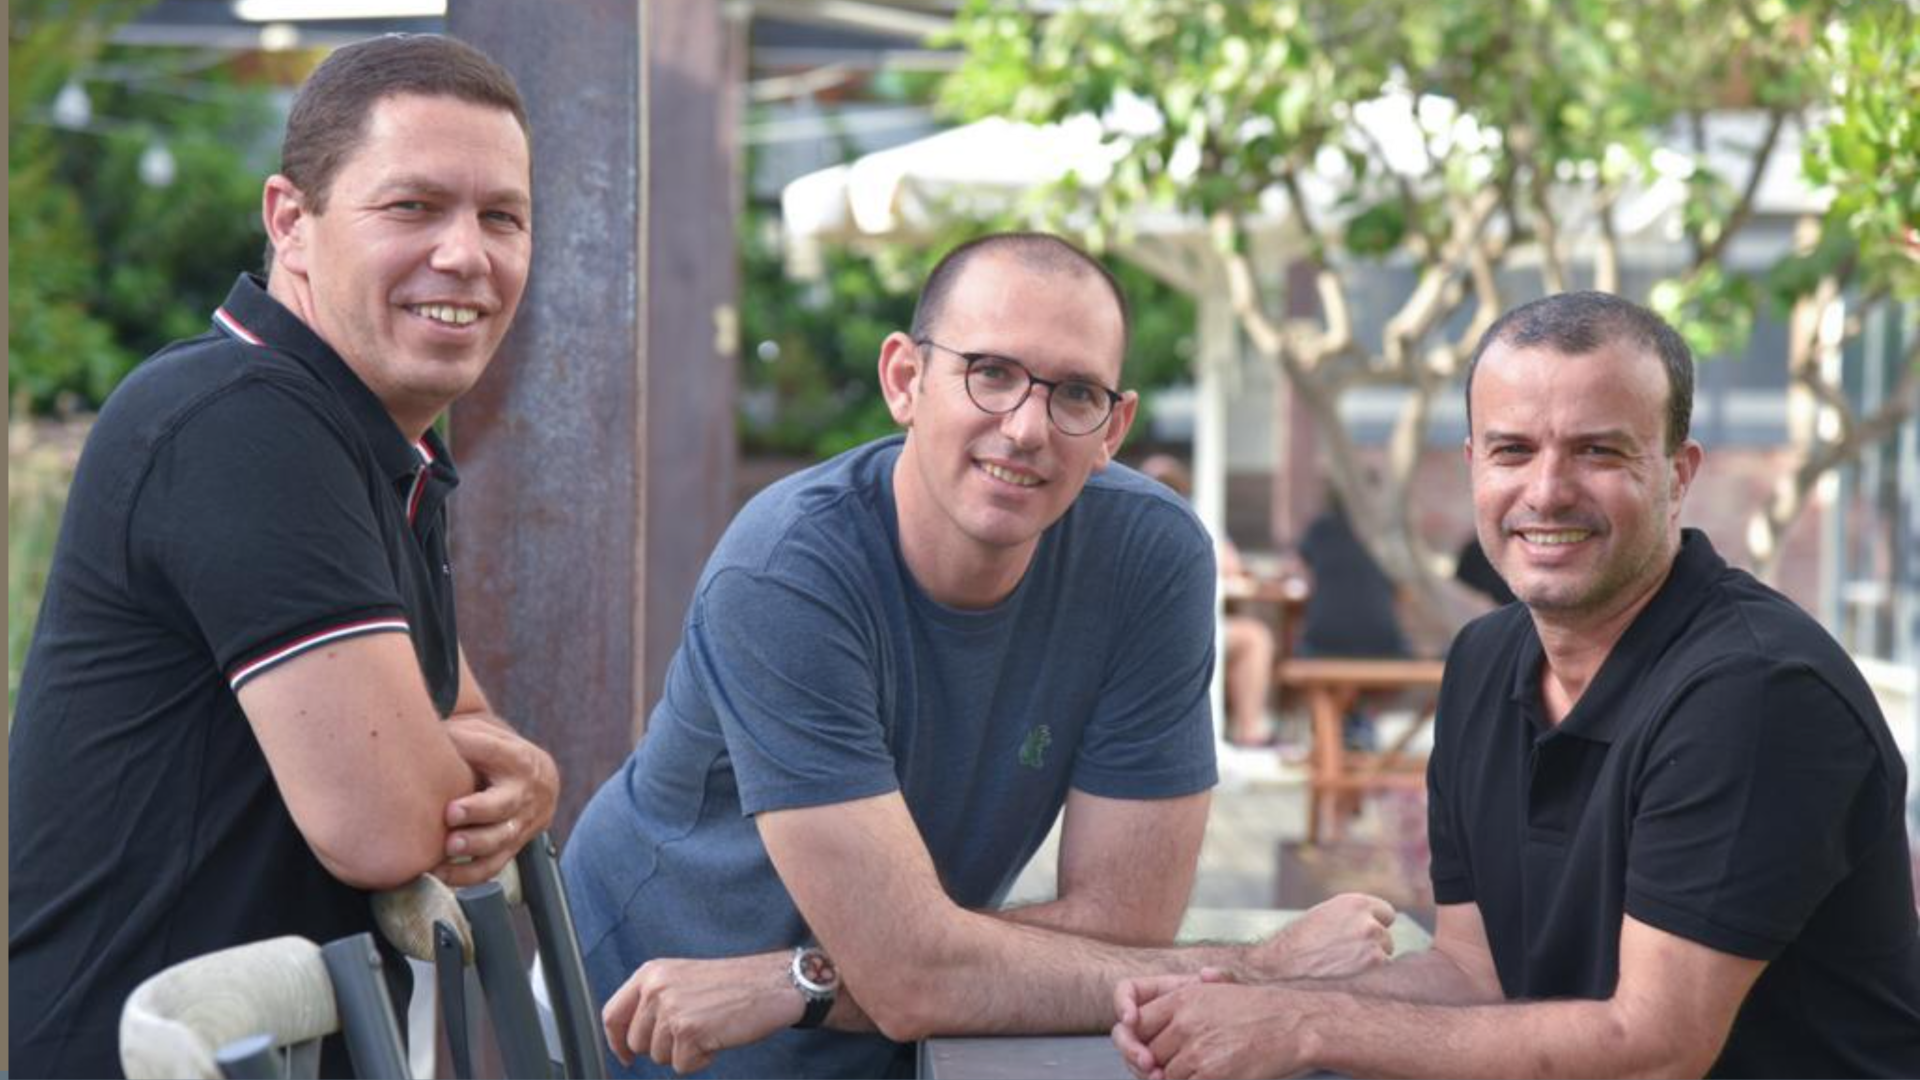 8fig co-founders Yaron Shapira, Assaf Dagan and Roei Yellin are pictured.